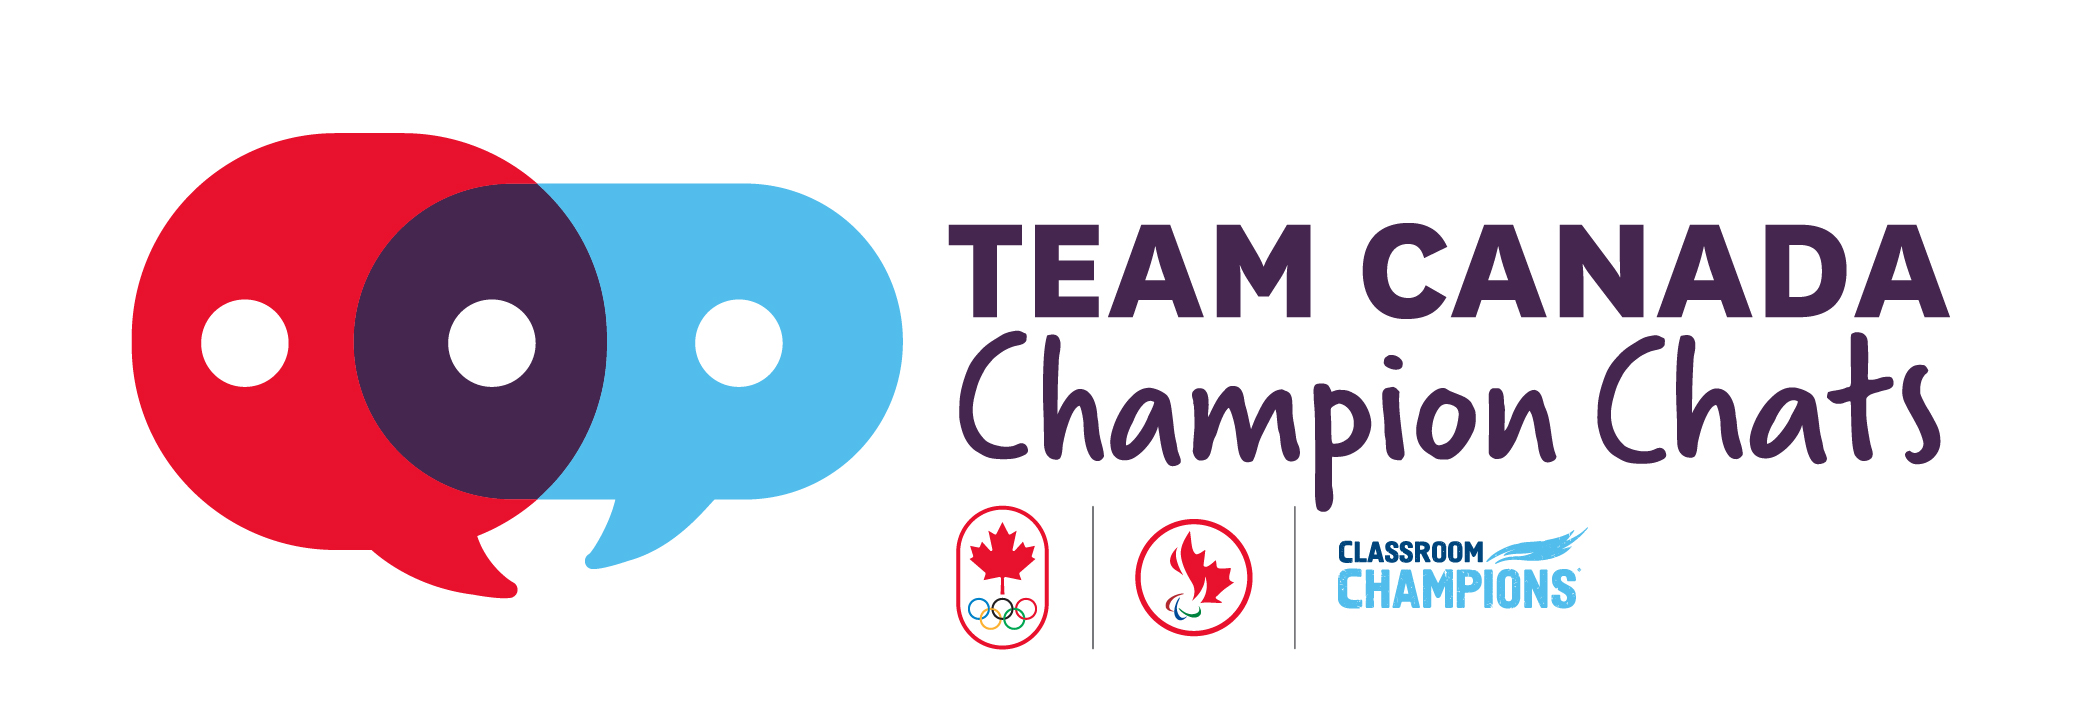 Team Canada Champion Chats logo with two conversation bubbles with the COC, CPC, and Classroom Champions logos